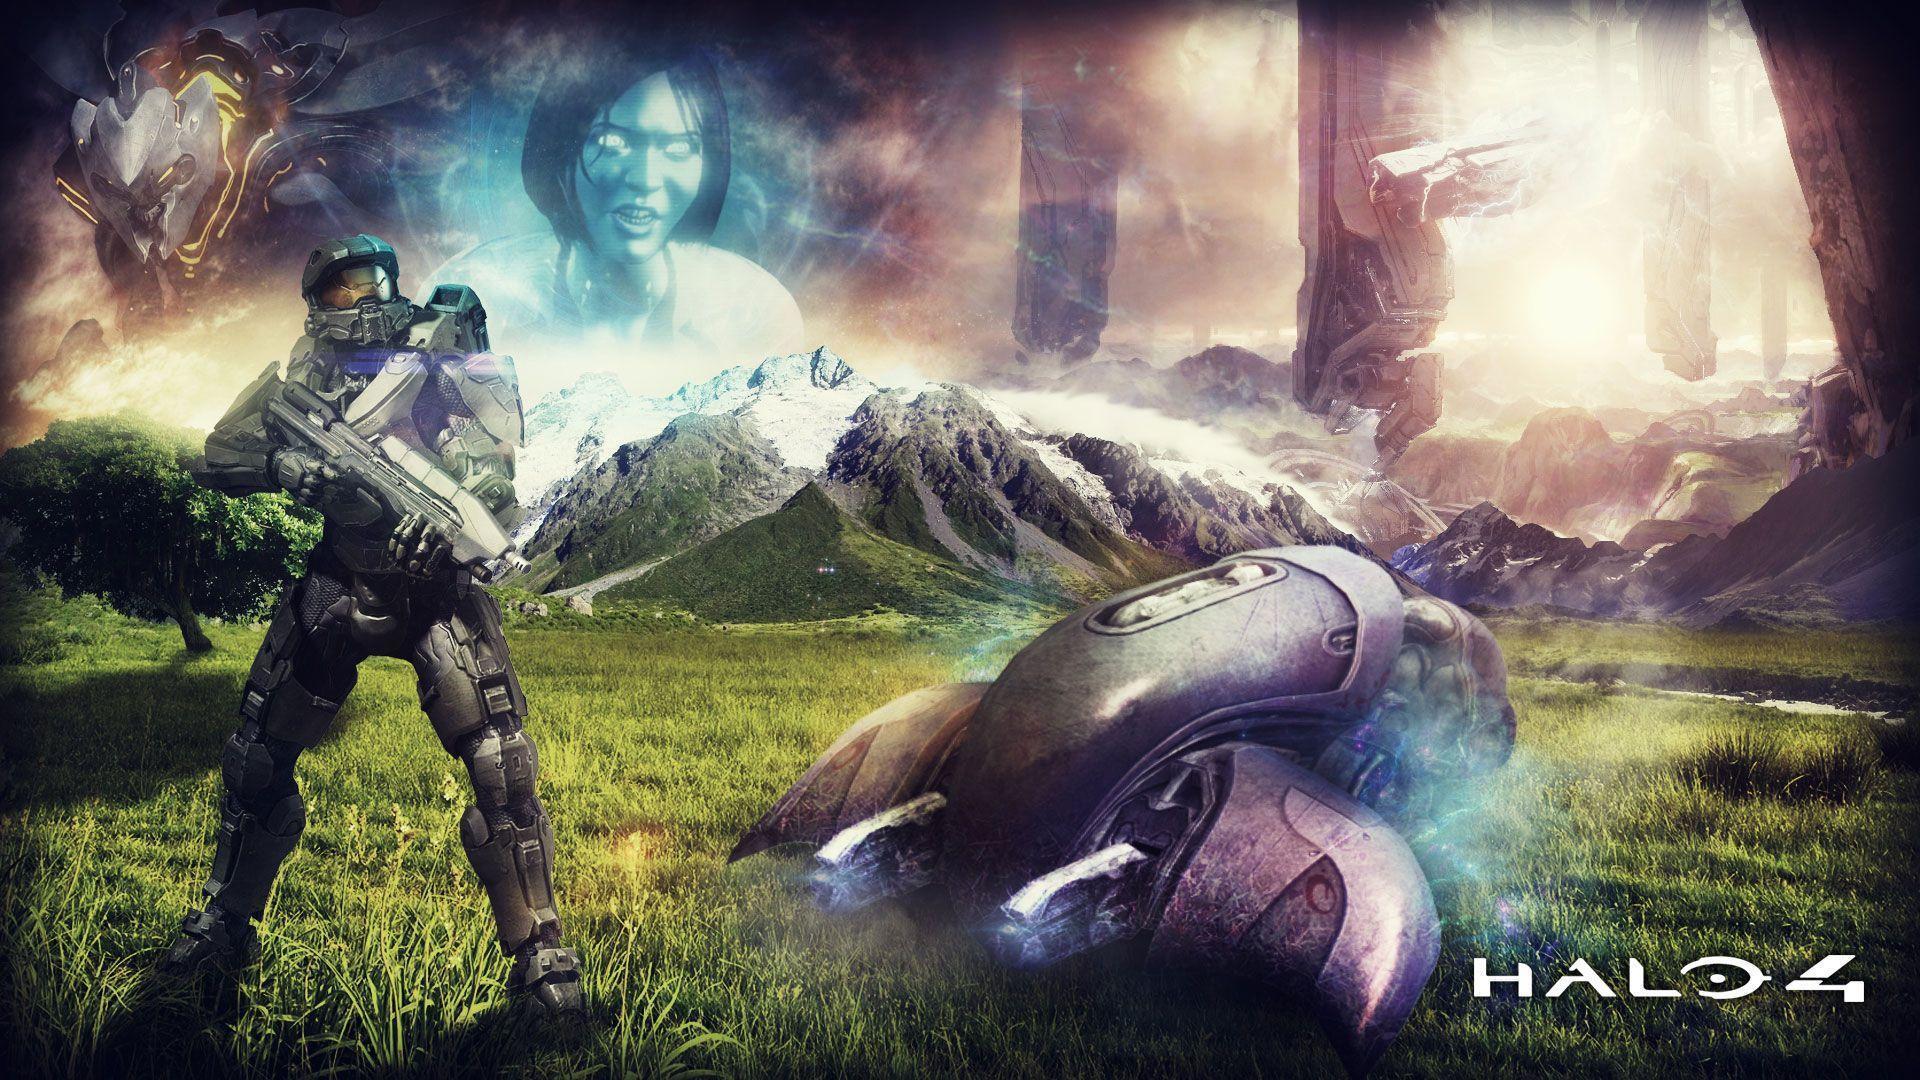 Halo 4 Wallpapers 1920x1080 - Wallpaper Cave